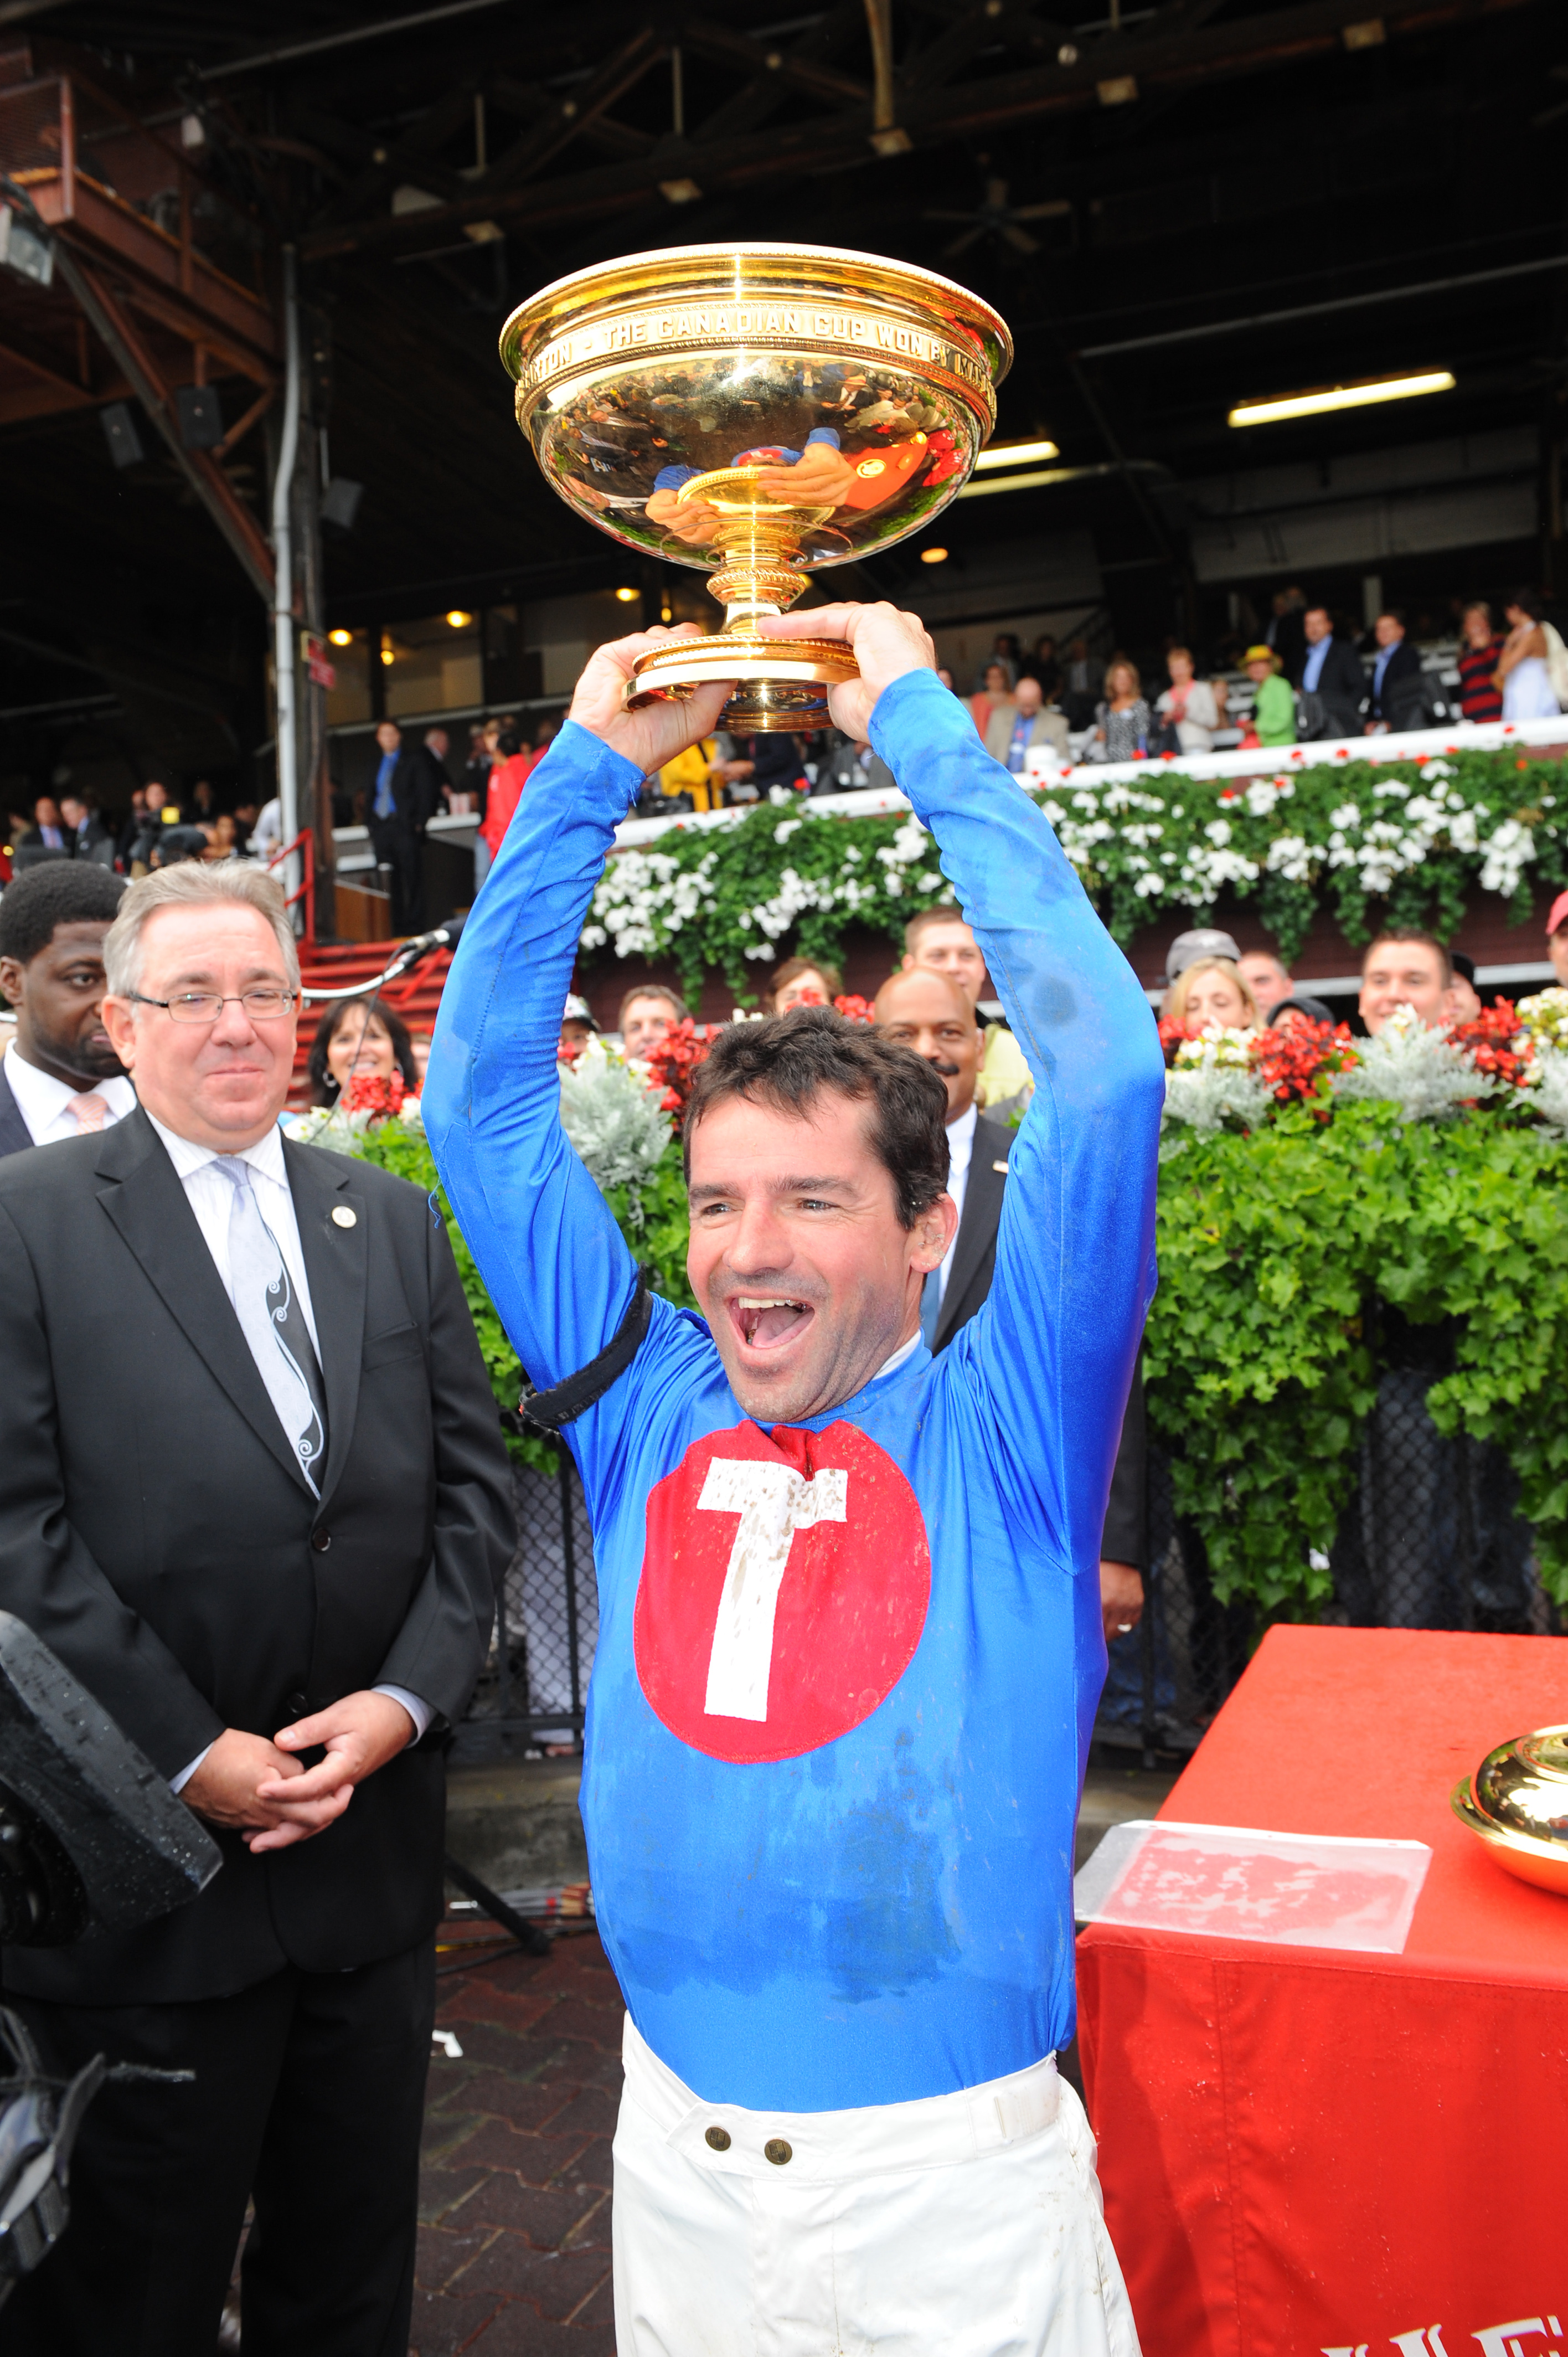 Kent Desormeaux celebrates winning the 2009 Travers Stakes with Summer Bird (NYRA)